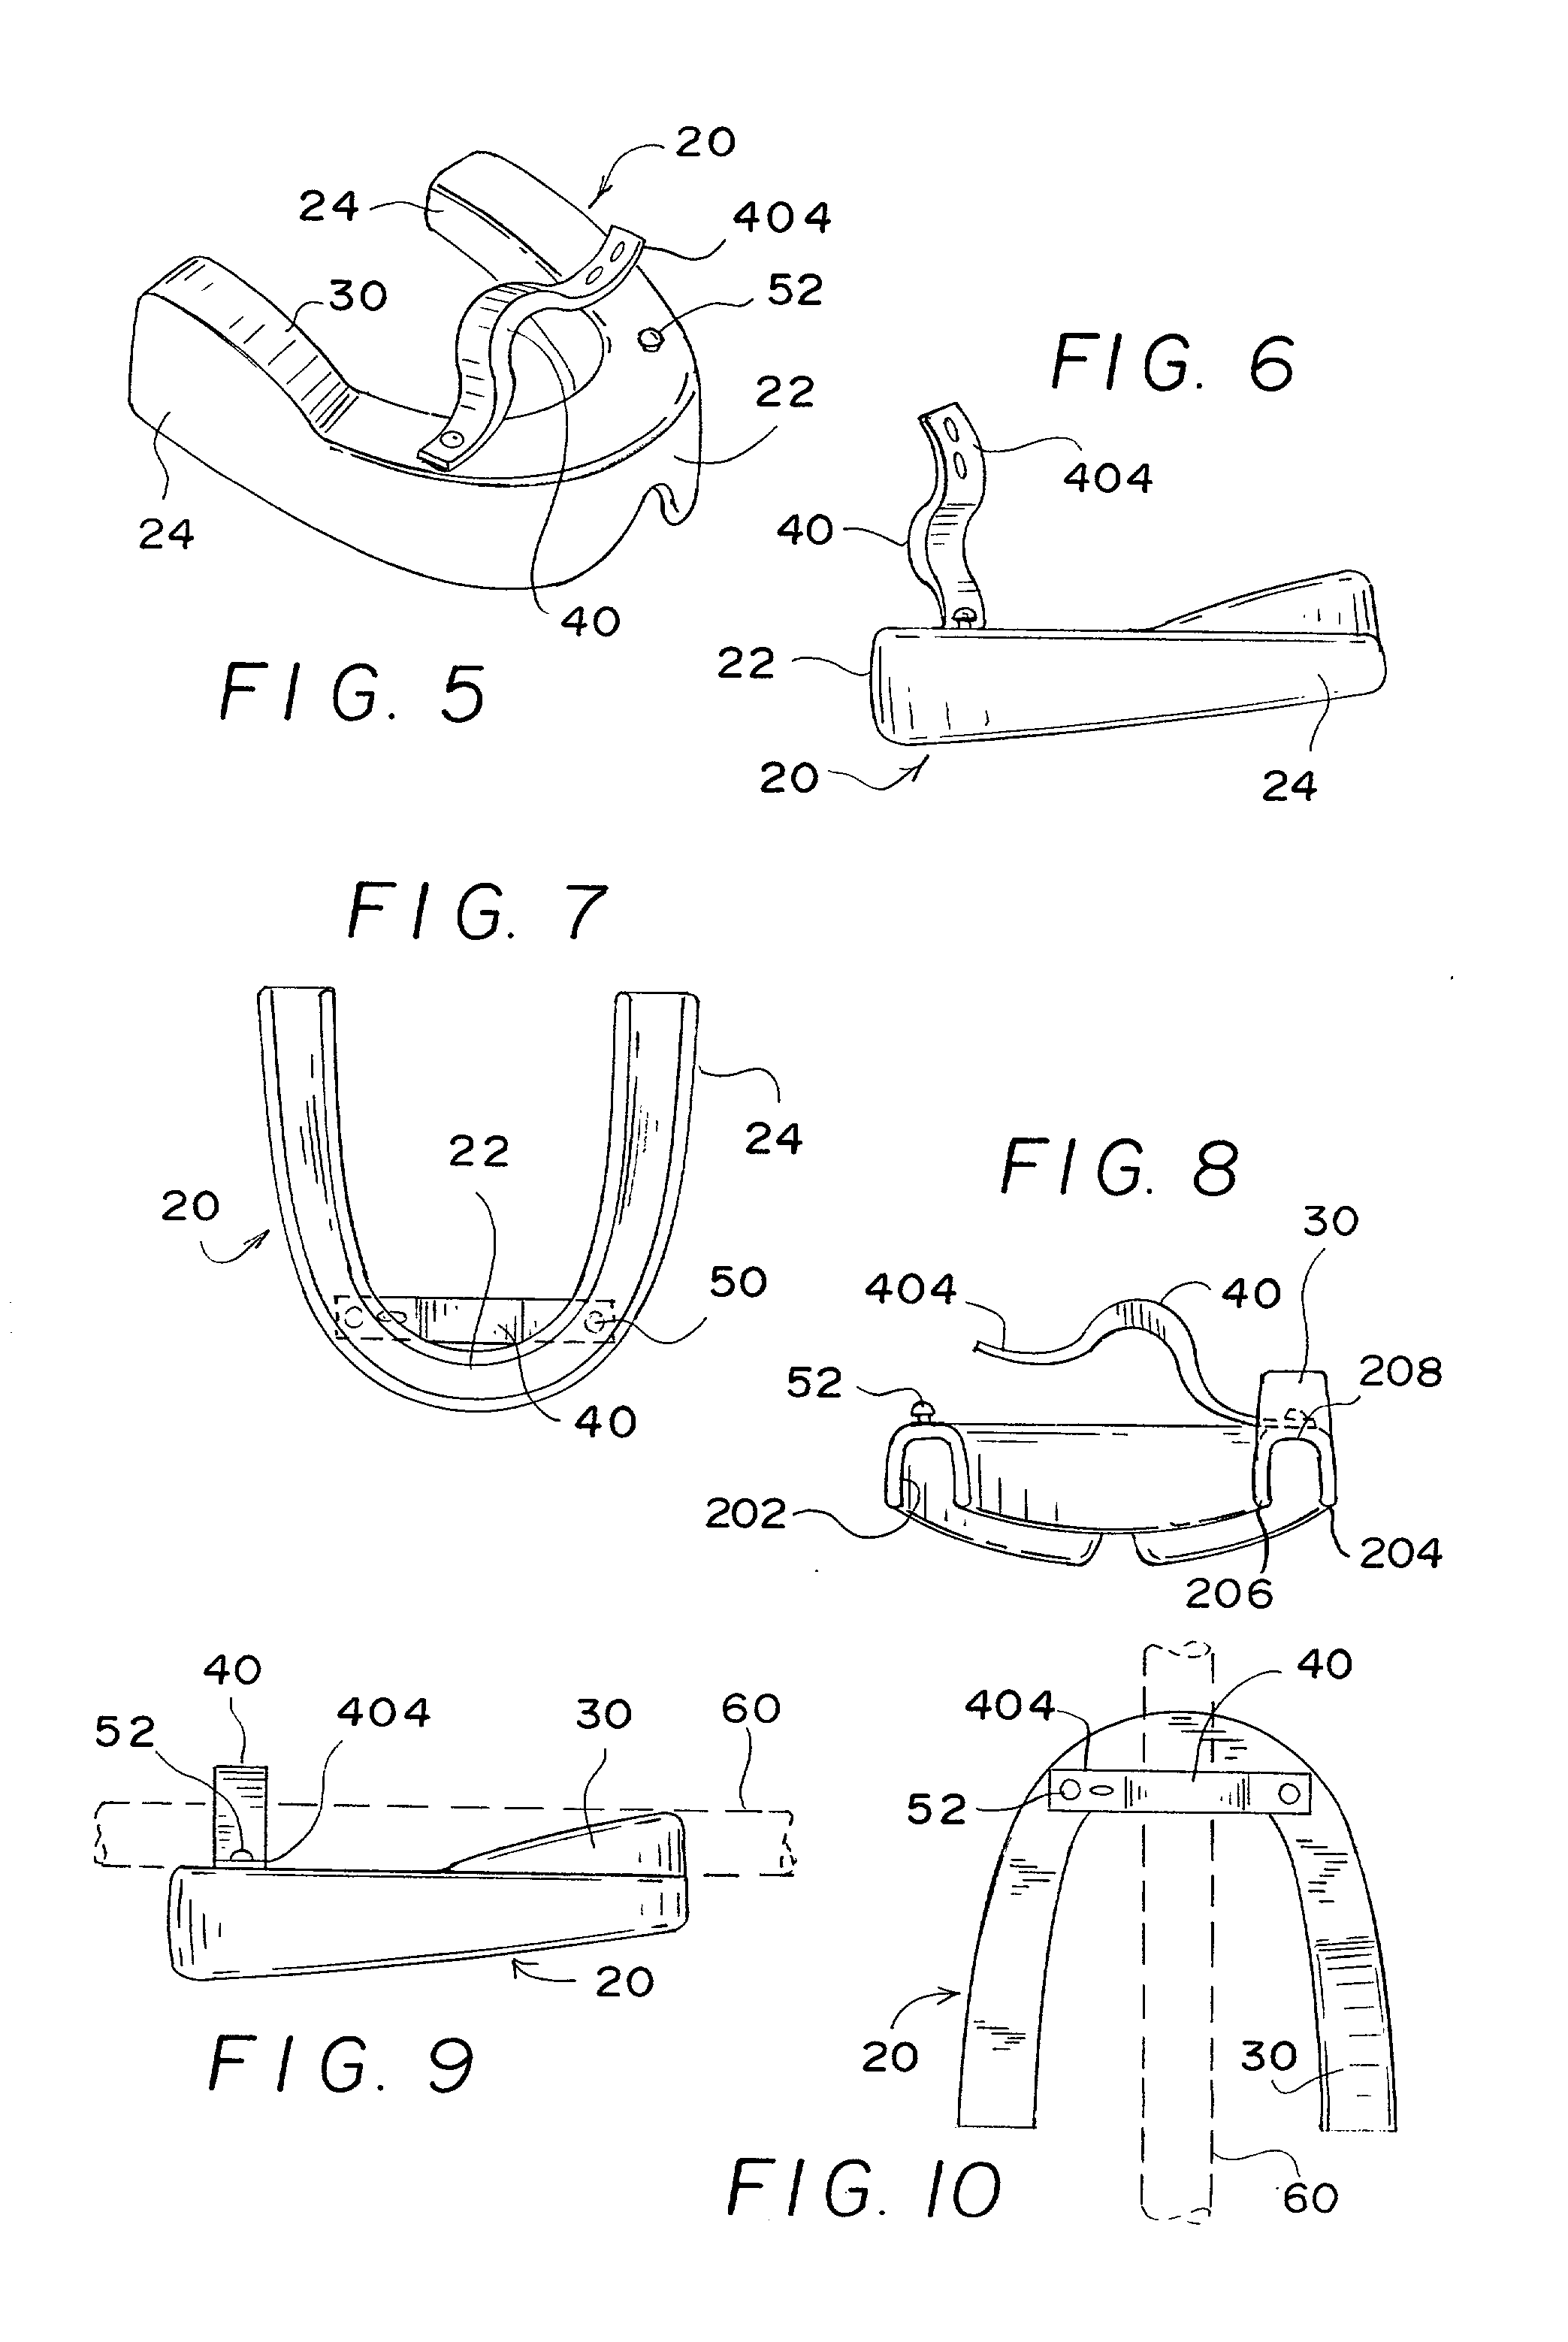 Catheter securing device